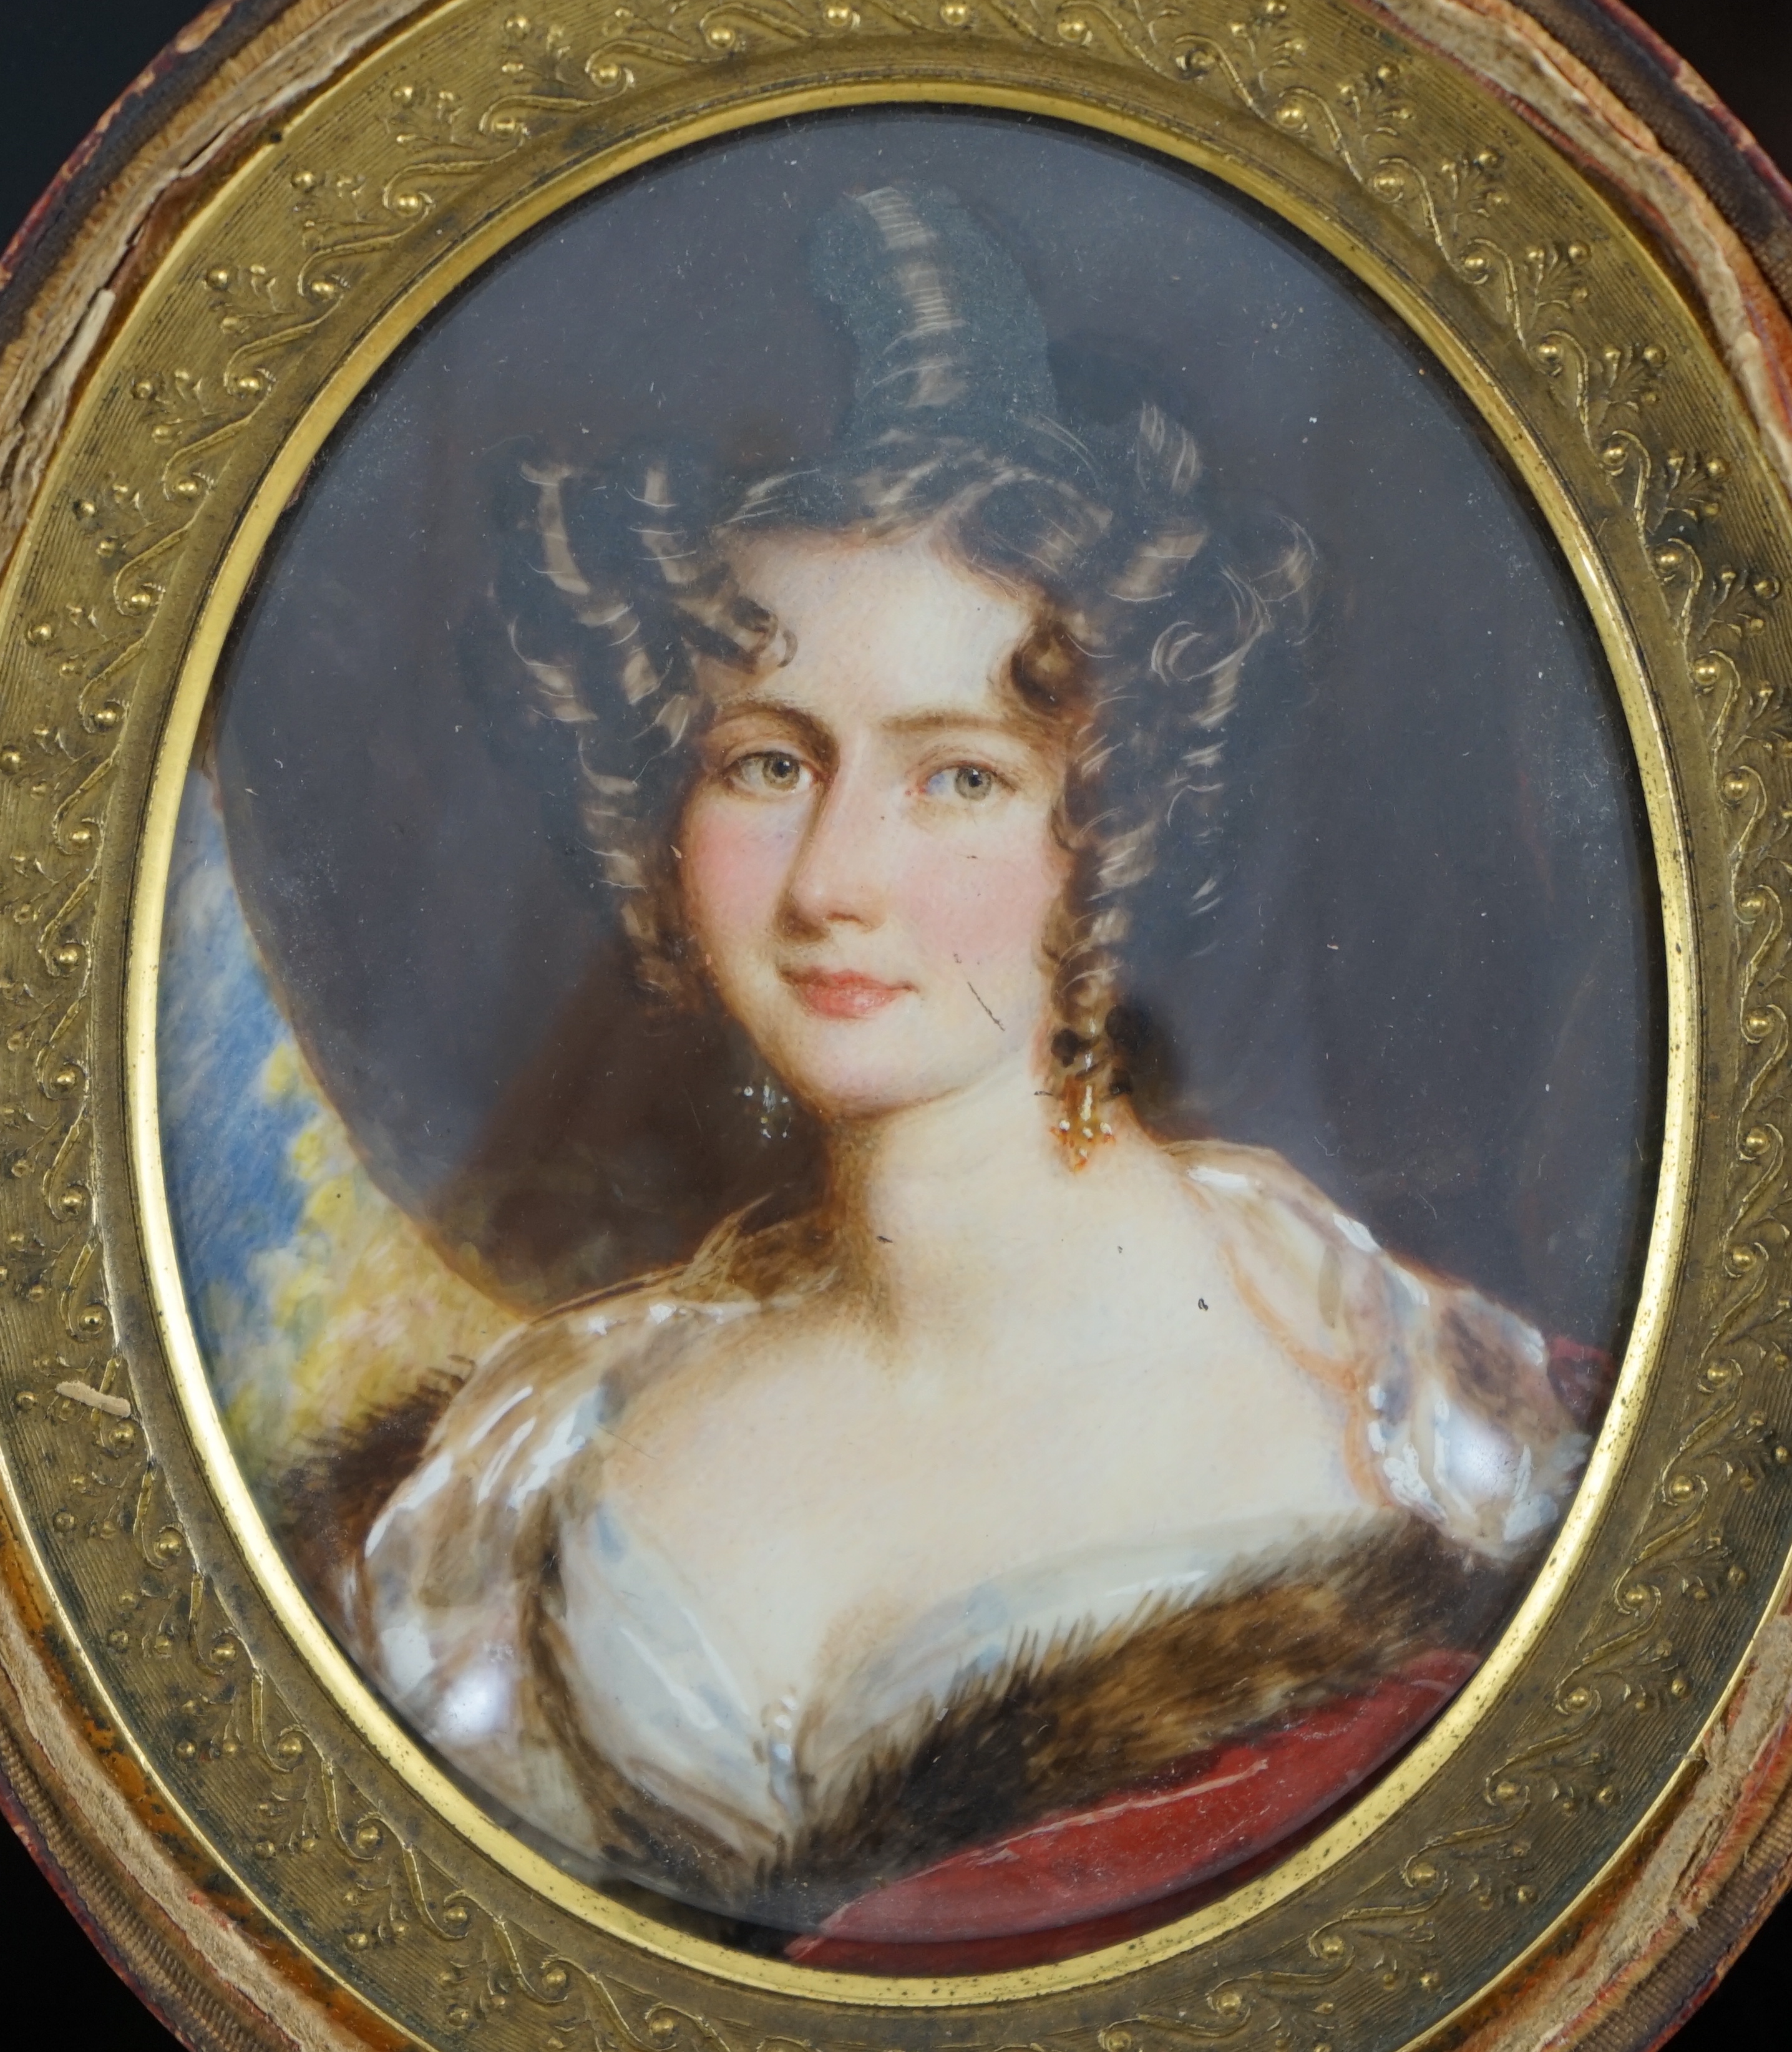 English School circa 1850, Portrait miniature of a lady, watercolour on ivory, 8.8 x 7cm. CITES submission reference 73TP737K